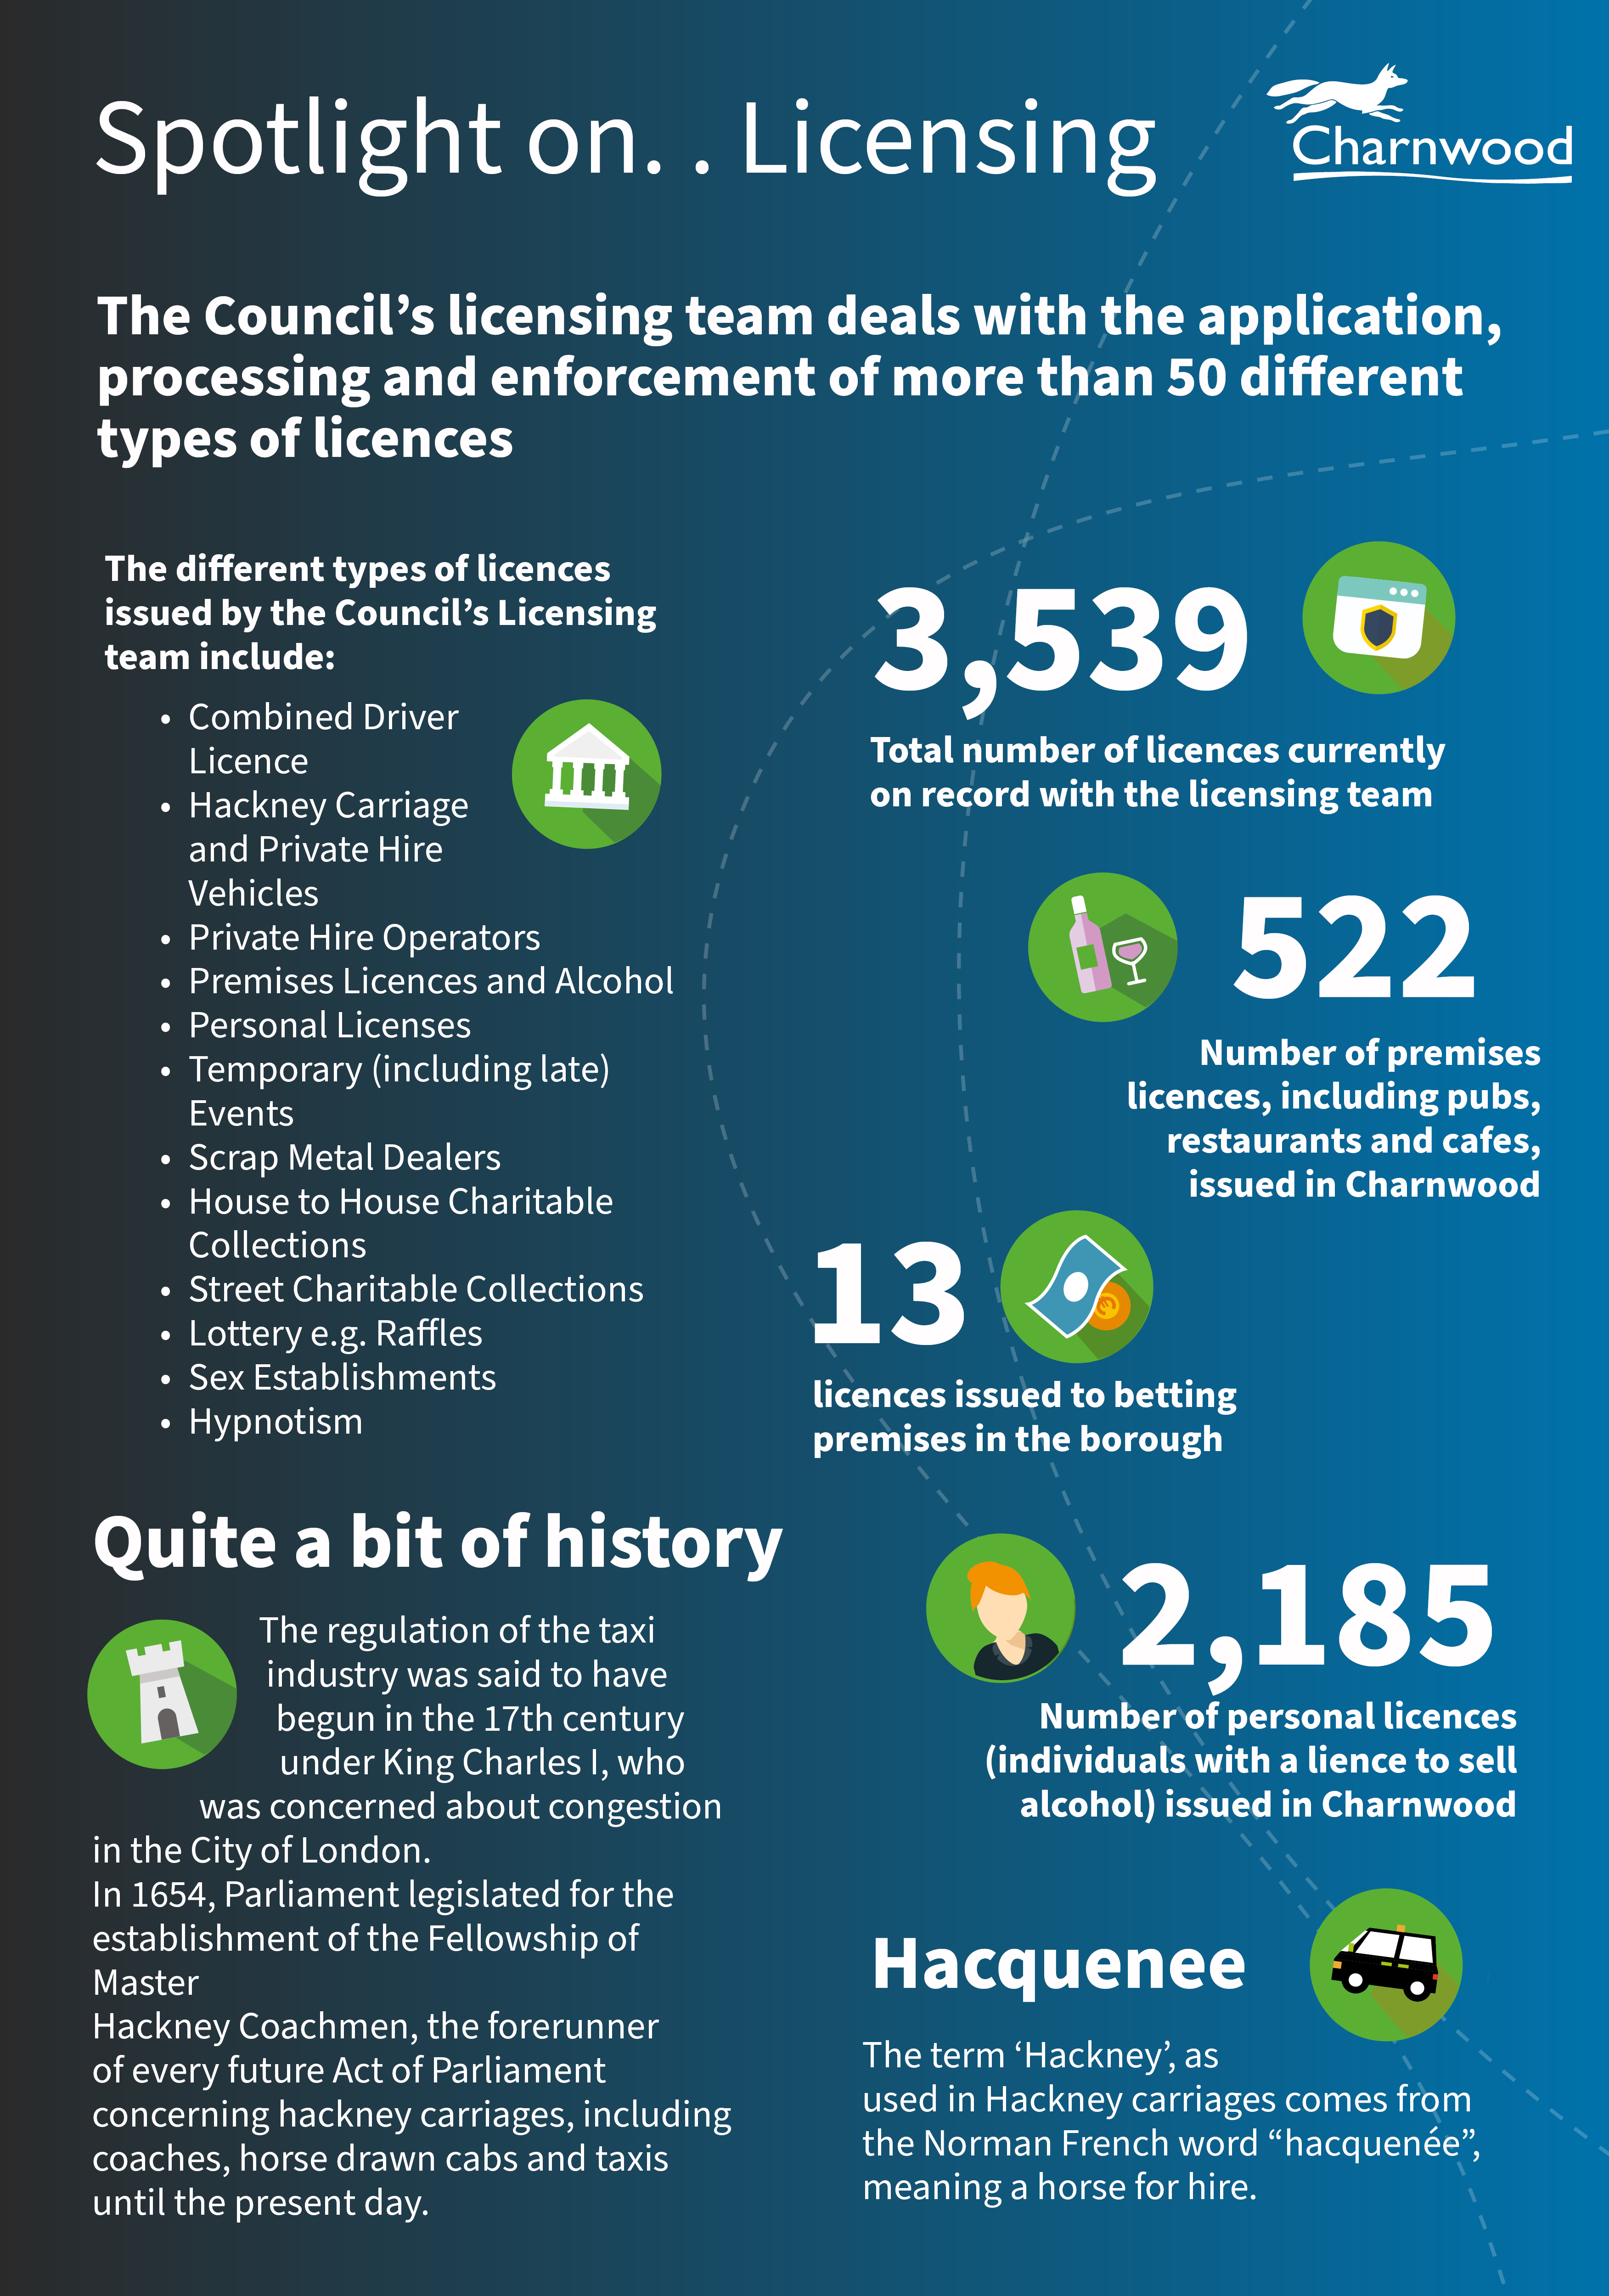 The image contains information about licensing. It says: Spotlight on. . LicensingThe Council’s licensing team deals with the application, processing and enforcement of more than 50 different types of licences.The different types of licences issued by the Council’s Licensing team include: Combined Driver Licence Hackney Carriage and Private Hire Vehicles Private Hire OperatorsPremises Licences and AlcoholPersonal LicensesTemporary (including late) EventsScrap Metal DealersHouse to House Charitable CollectionsStreet Charitable CollectionsLottery e.g. RafflesSex EstablishmentsHypnotism3,539 -Total number of licences currently on record with the licensing team522 - Number of premises licences, including pubs, restaurants and cafes, issued in Charnwood13 - licences issued to betting premises in the borough2,185 - Number of personal licences (individuals with a lience to sell alcohol) issued in CharnwoodHacquenee - The term ‘Hackney’, as used in Hackney carriages comes from the Norman French word “hacquenée”, meaning a horse for hire.